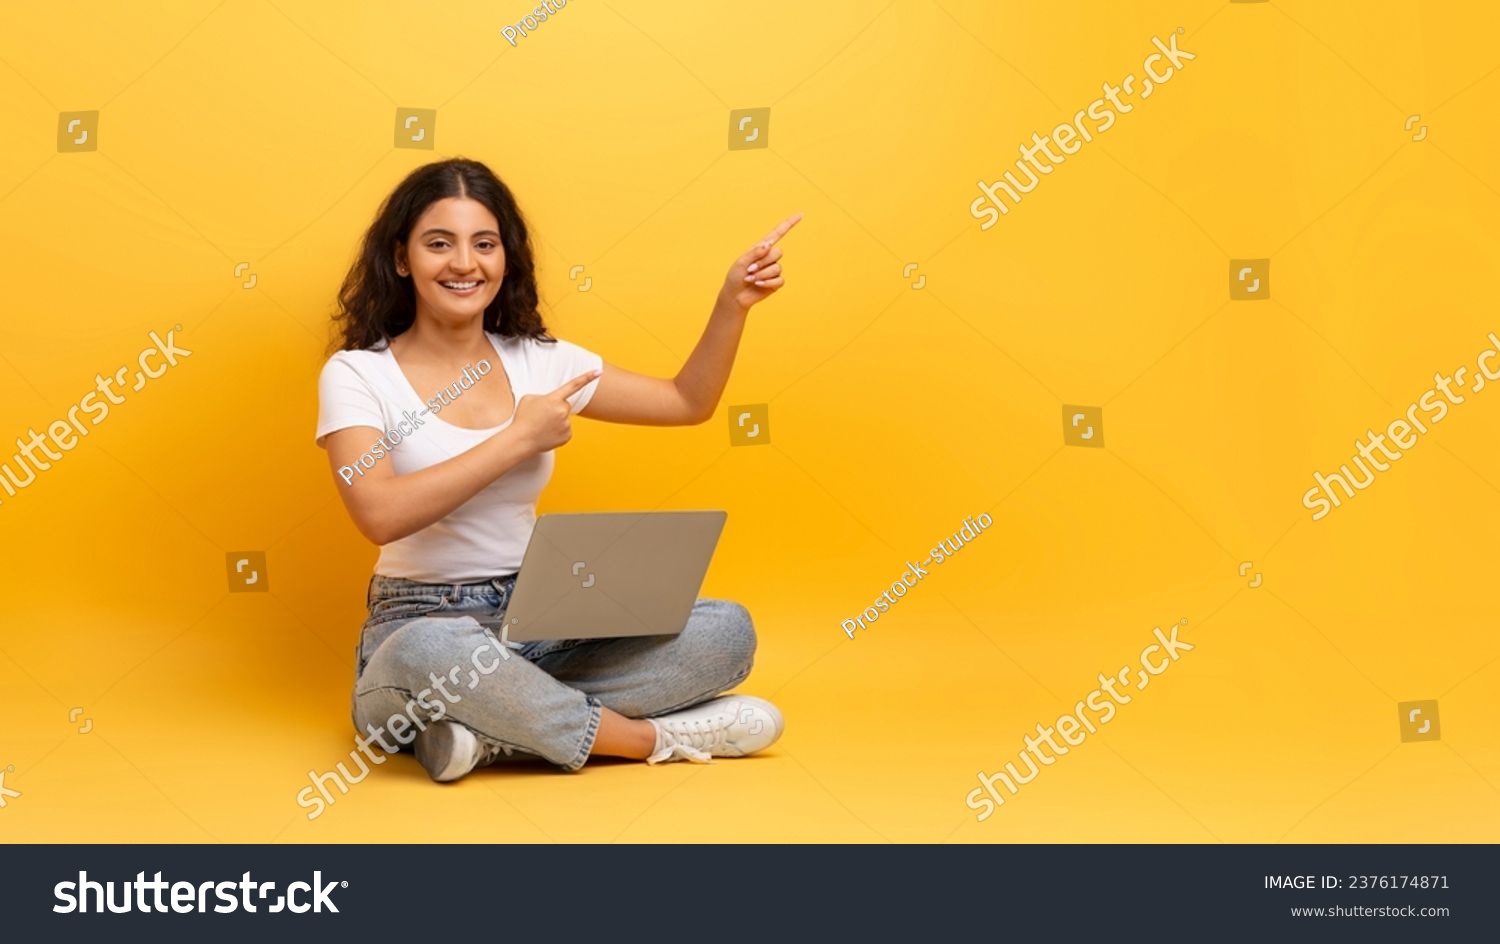 Remote job opportunities, freelance. Happy beautiful curly young indian woman student wearing casual outfit sitting on floor with laptop on her lap, pointing at copy space, yellow background, panorama #2376174871